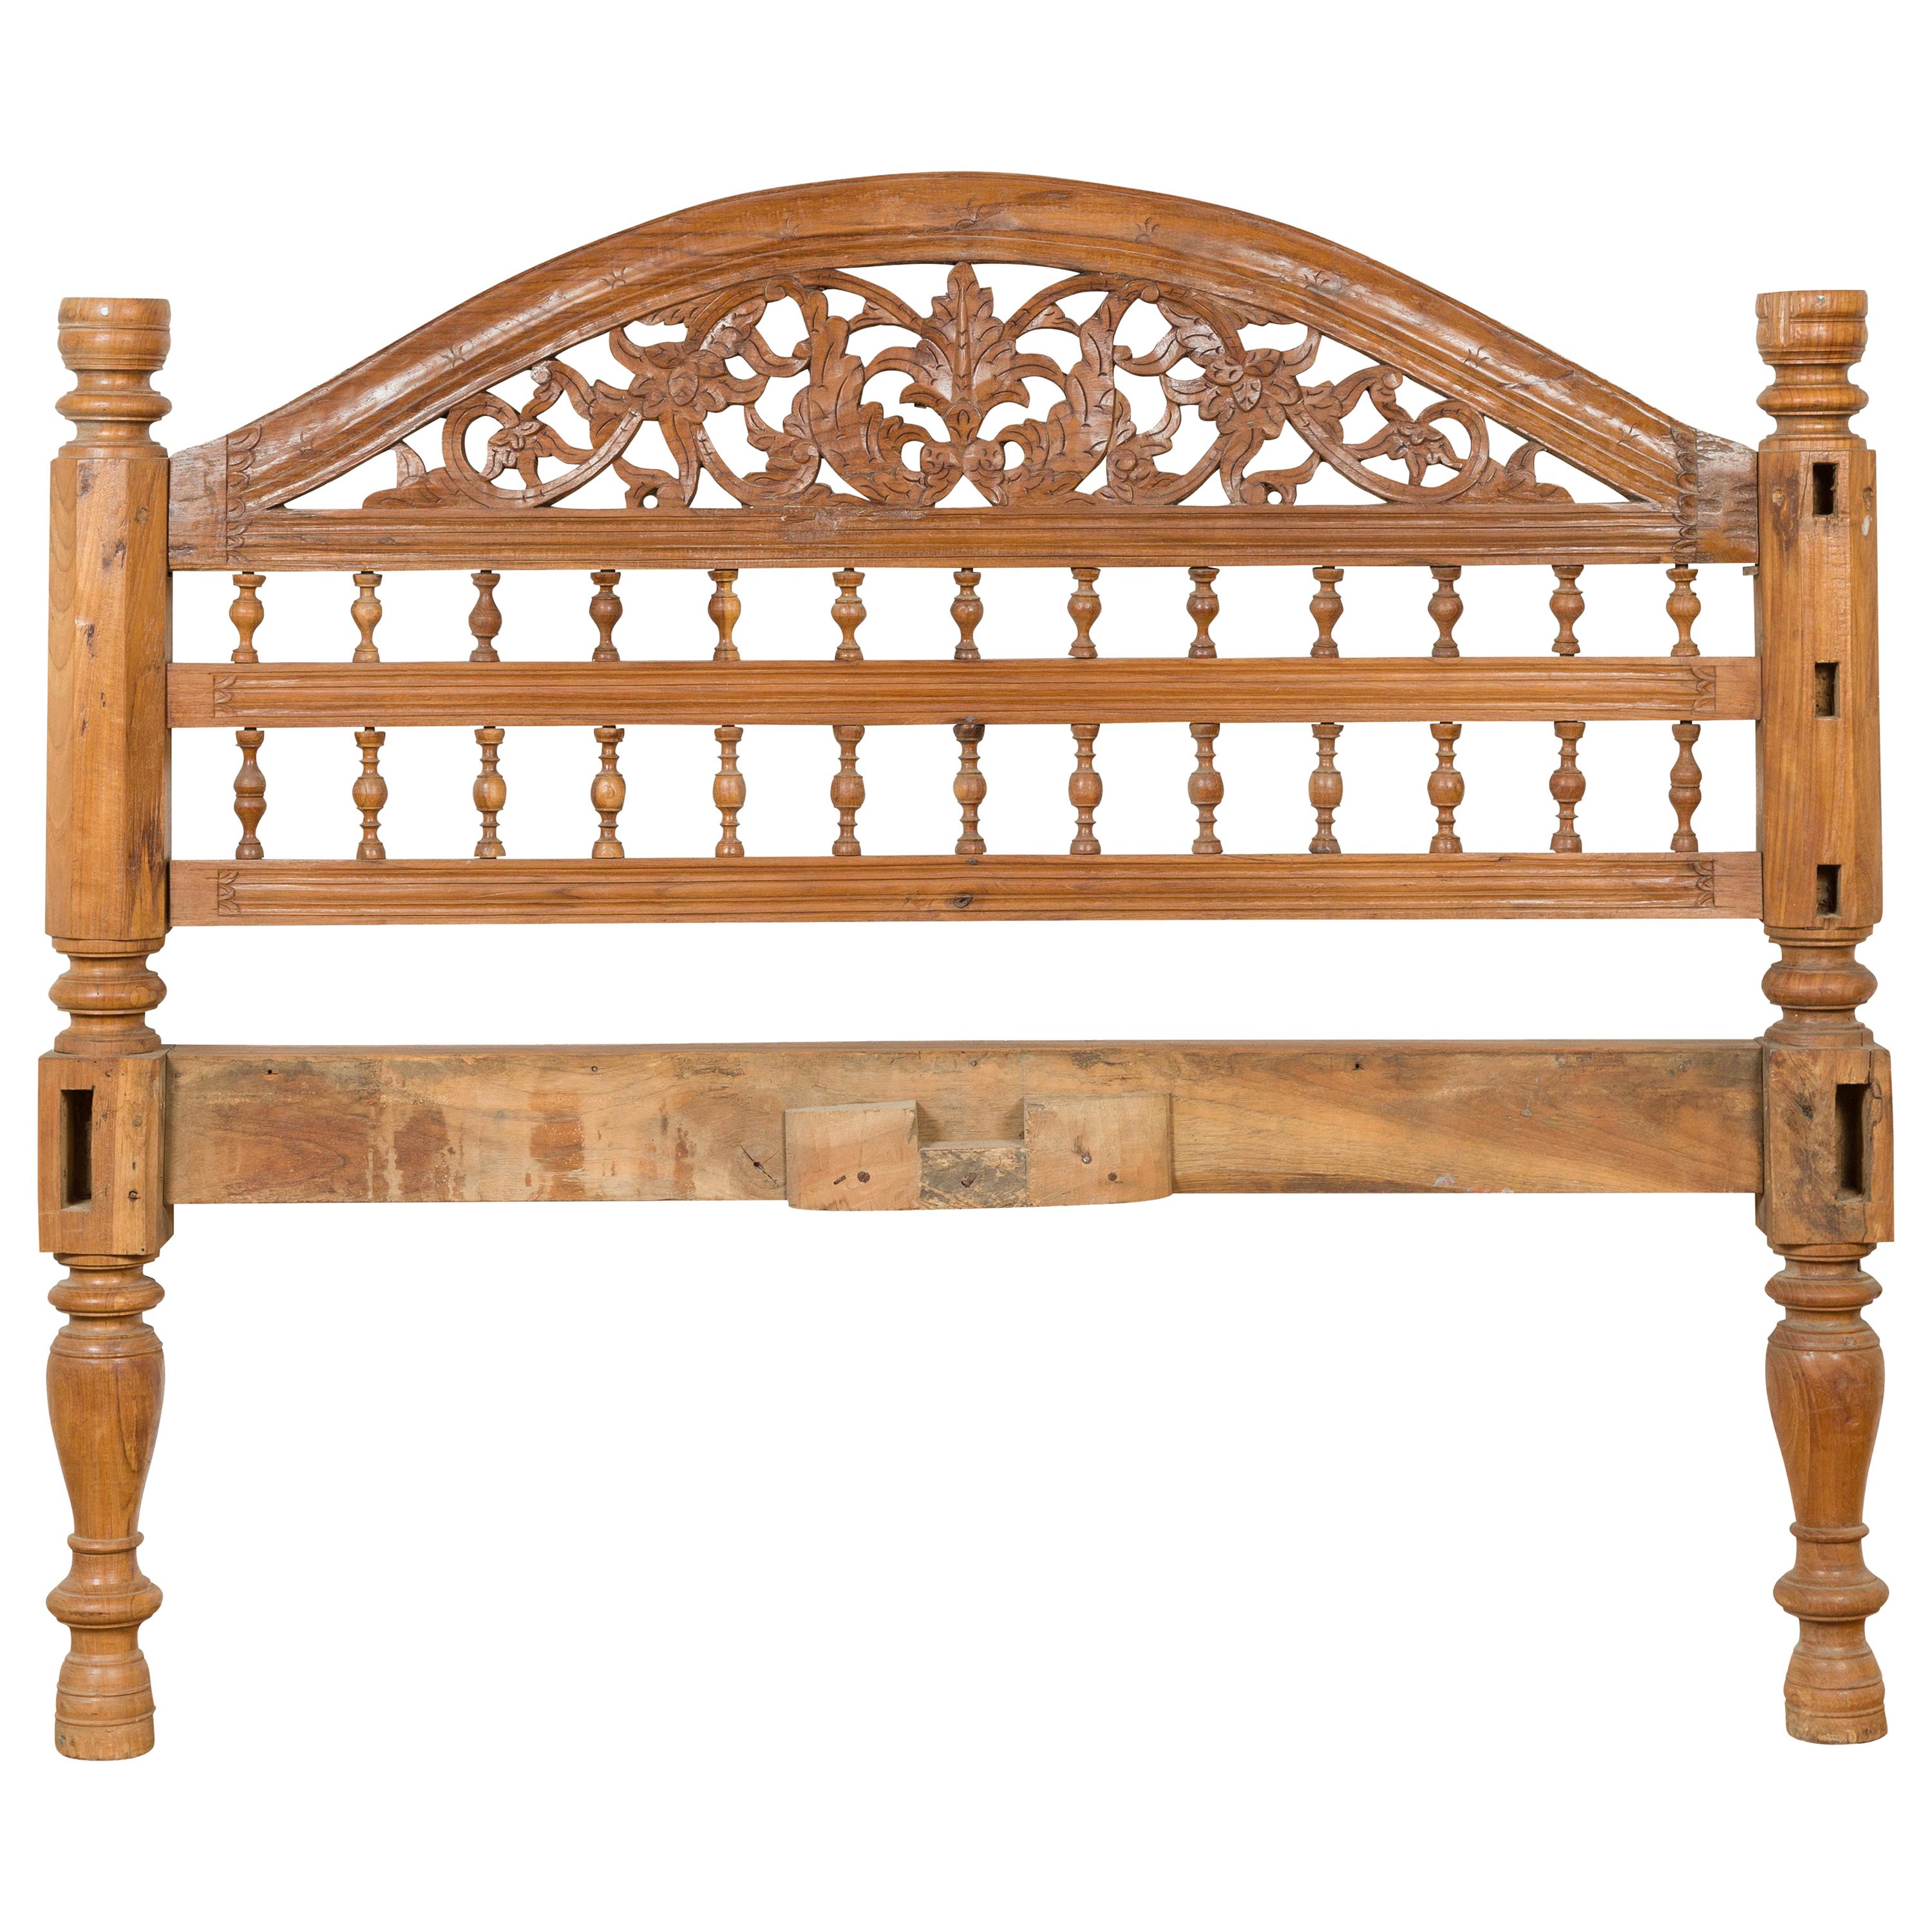 Vintage Carved Indonesian Headboard with Scrolling Foliage and Petite Balusters For Sale